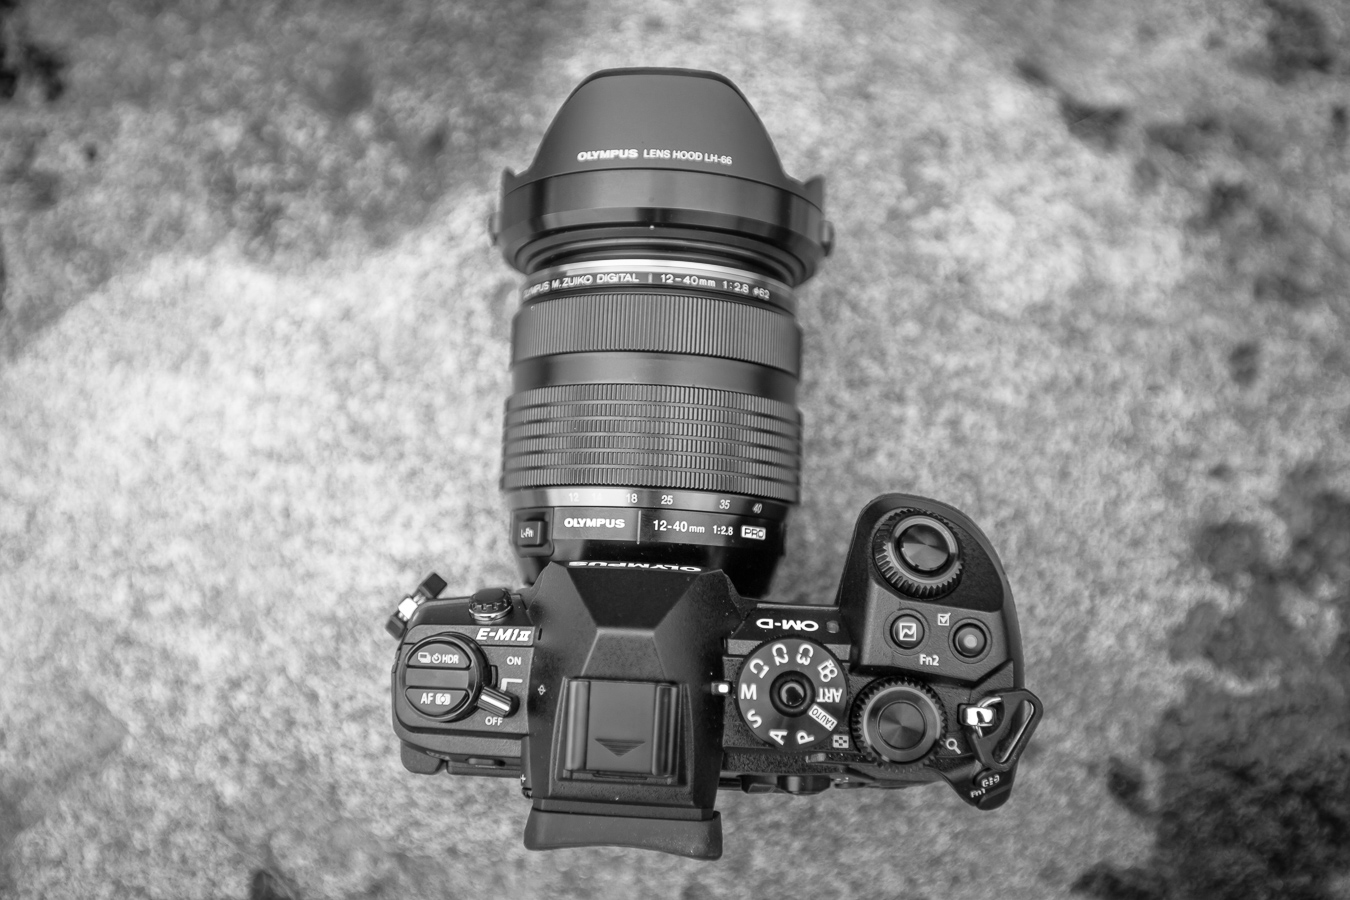 Olympus OM-D E-M1 mkii, review, mirrorless camera, cycling, photography, outdoor, sports, test,